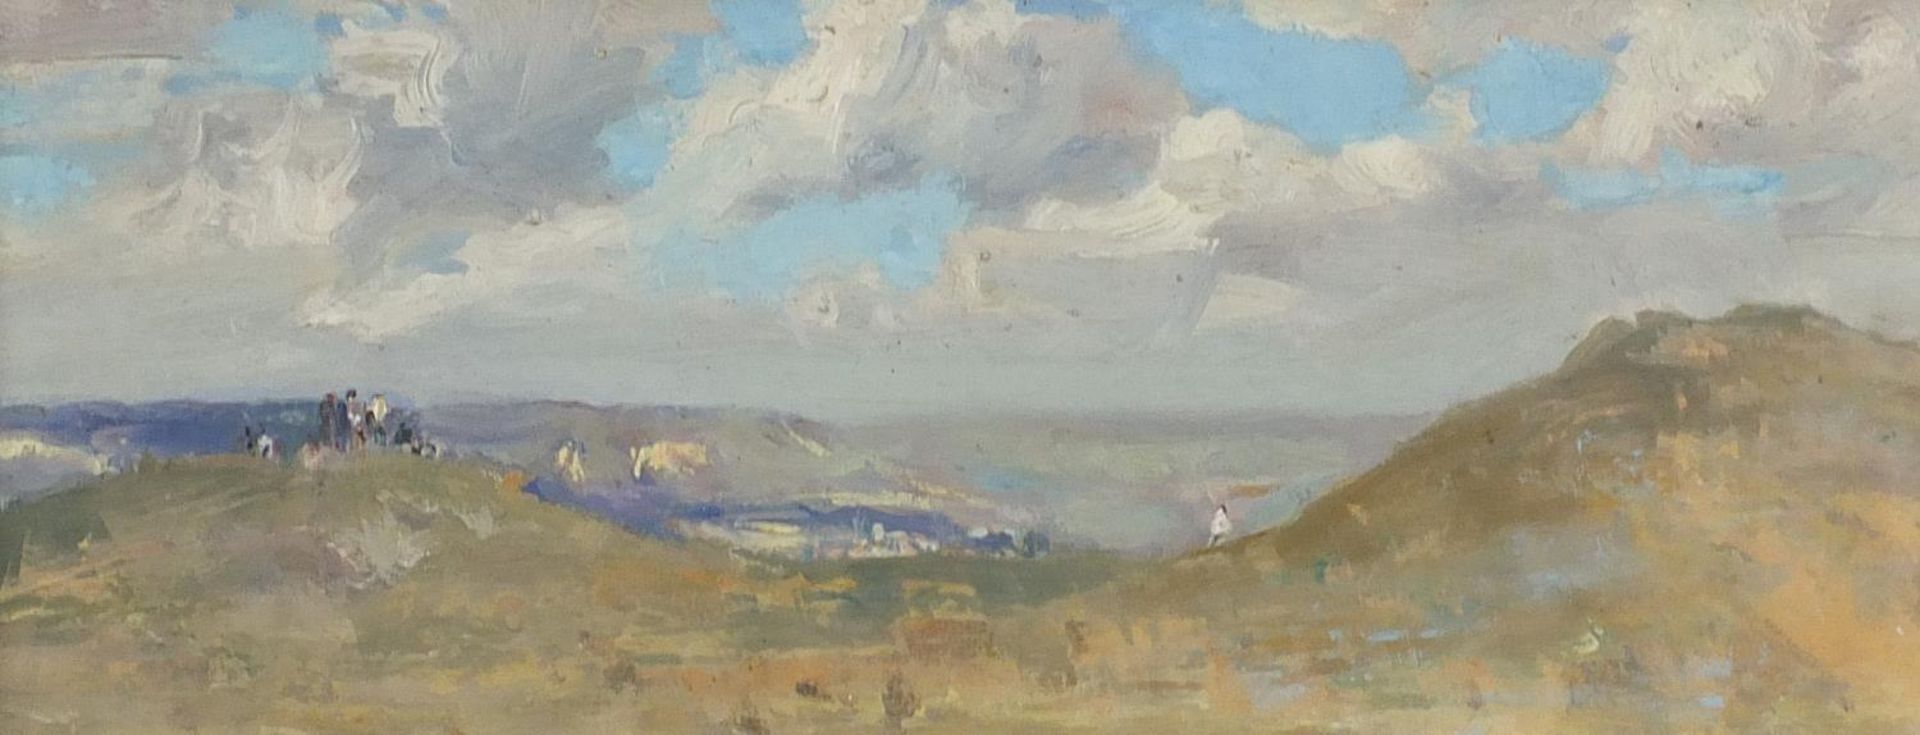 Attributed to Alexei Sokolov - Crimean landscape, oil on board, mounted and framed, 41cm x 15.5cm